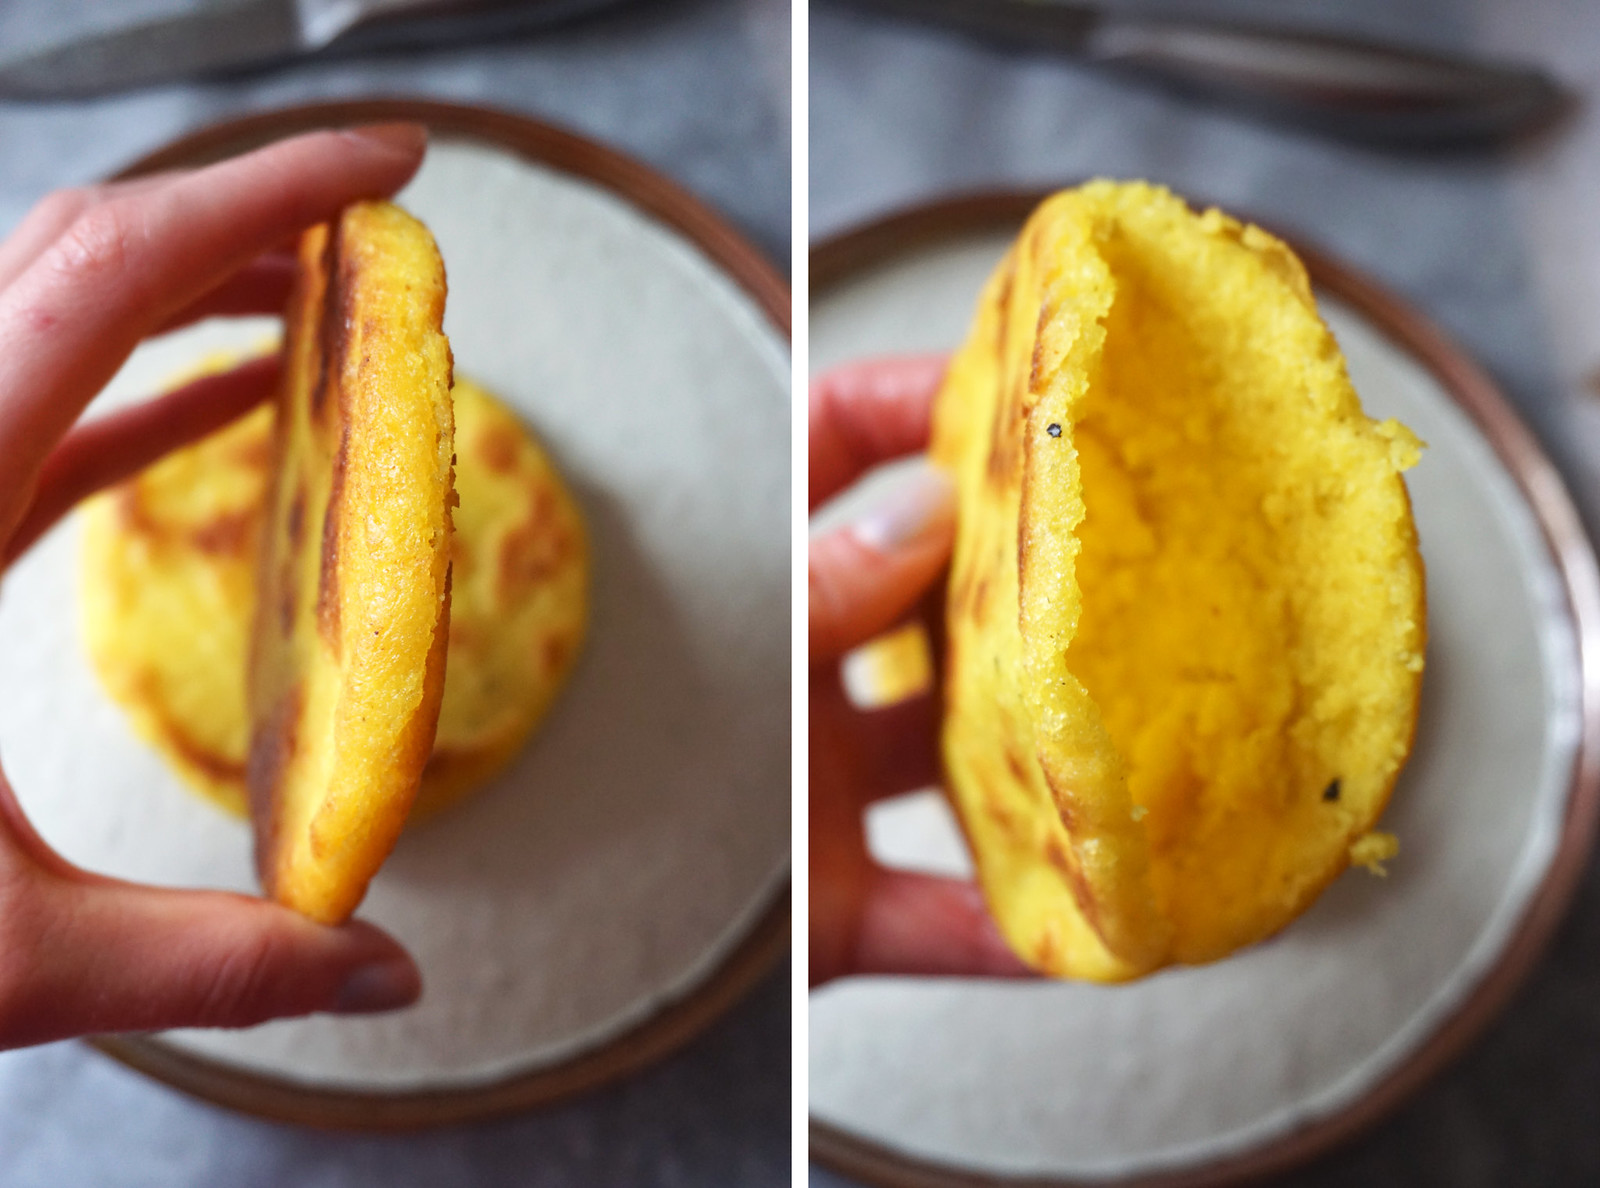 Gluten free arepas making process - arepa with an opening sliced into it